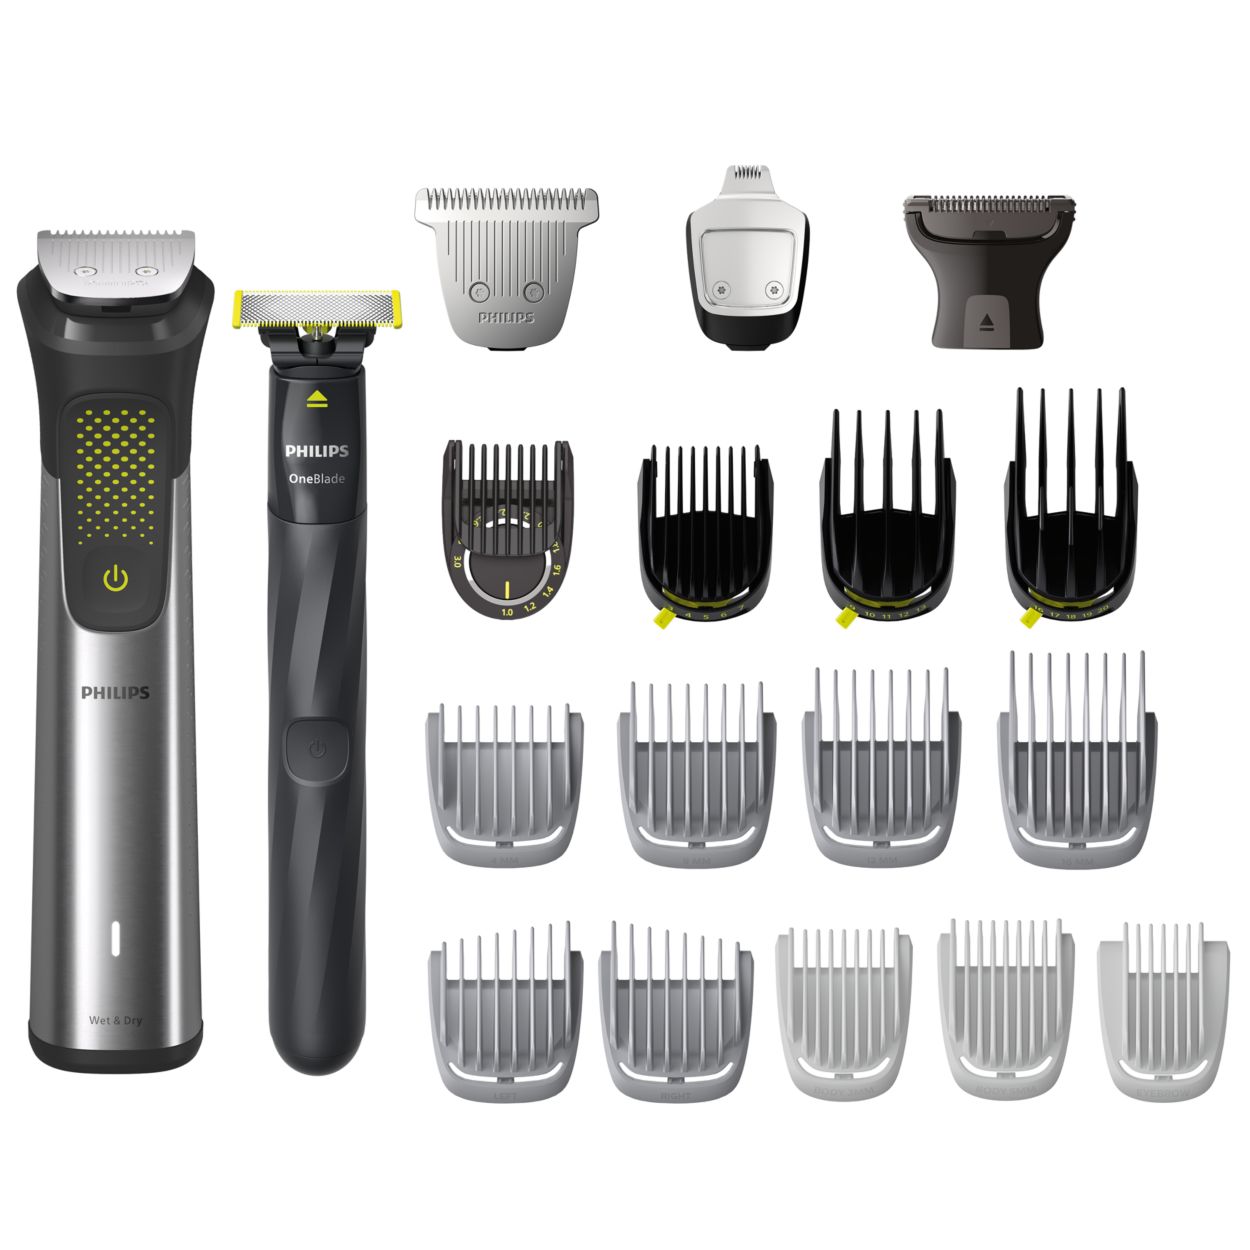 All-in-One Trimmer Series 9000 MG9553/15 Philips 